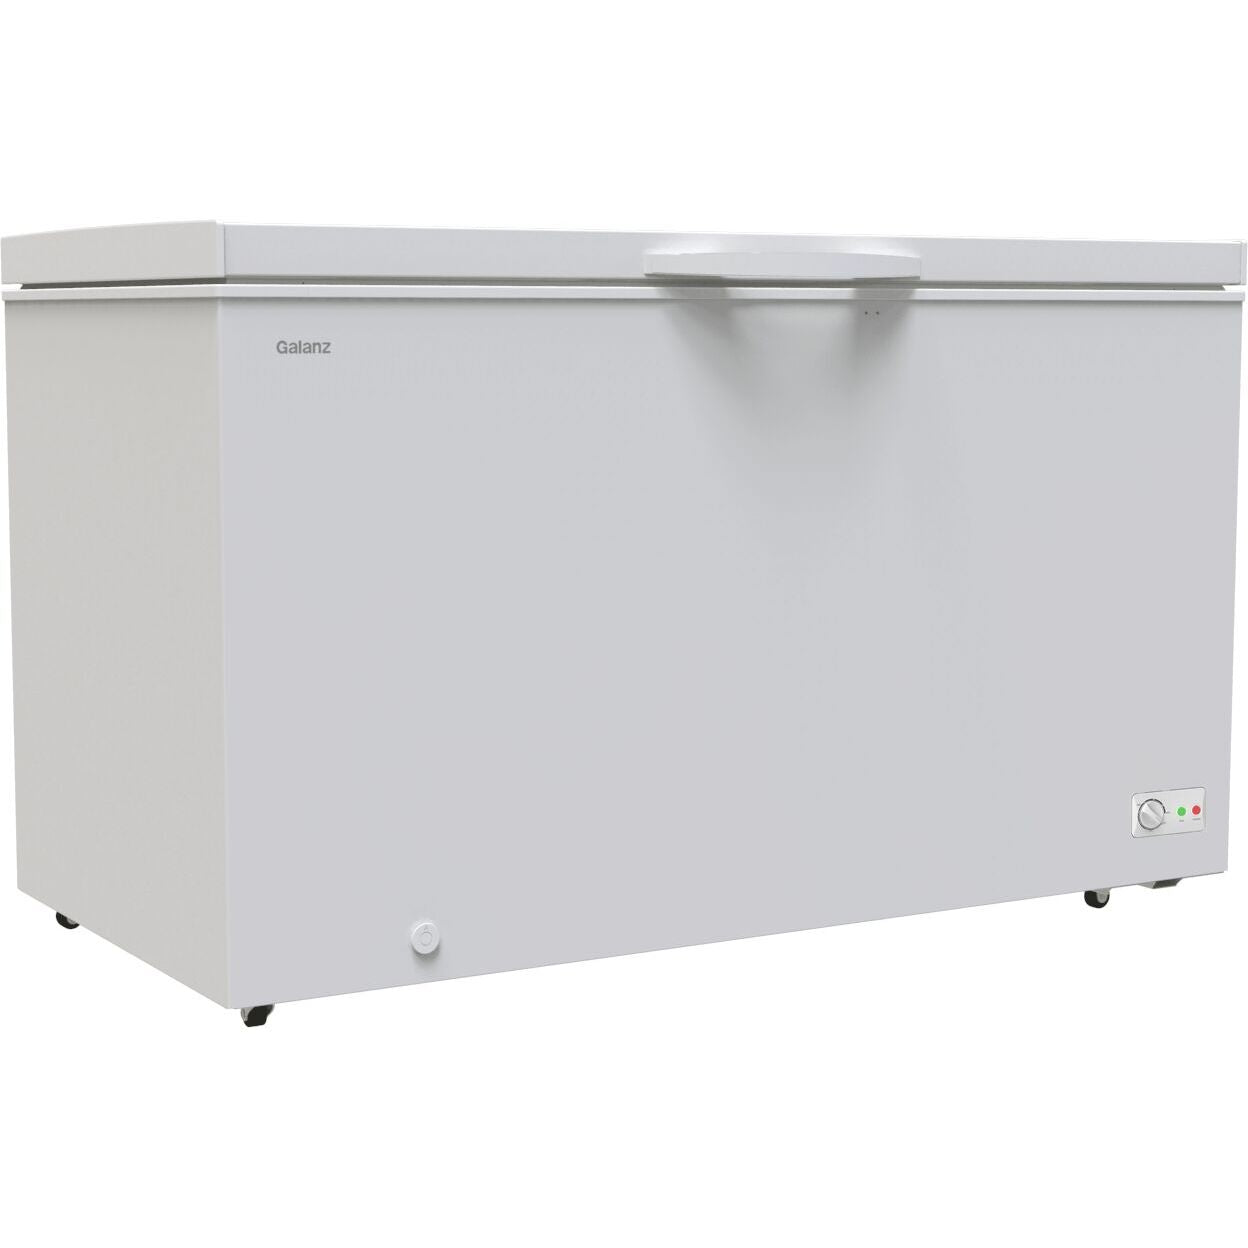 Galanz 14 Cu. Ft. Manual Defrost Chest Freezer in White (GLF14CWED11)